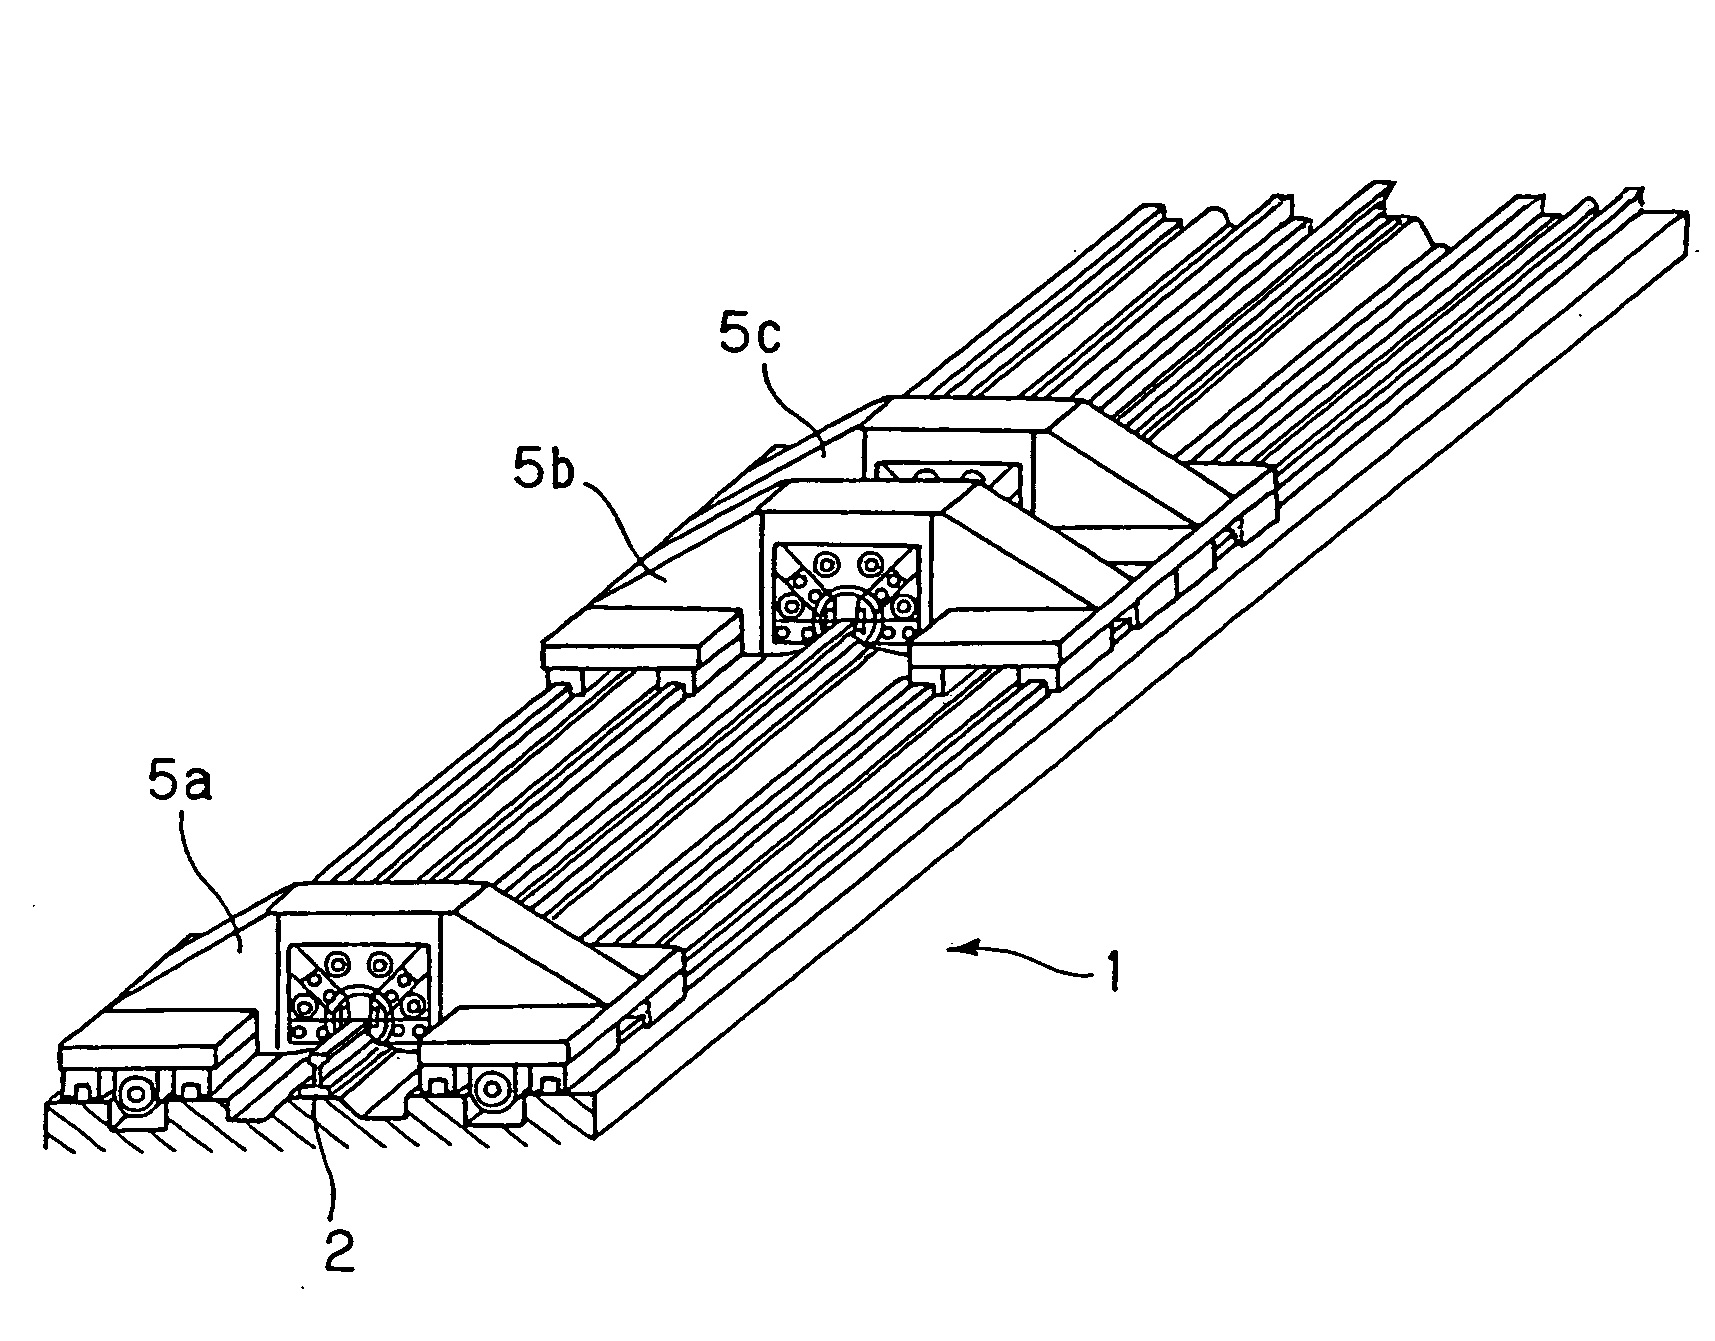 Method and apparatus for cutting long scale hardened steel